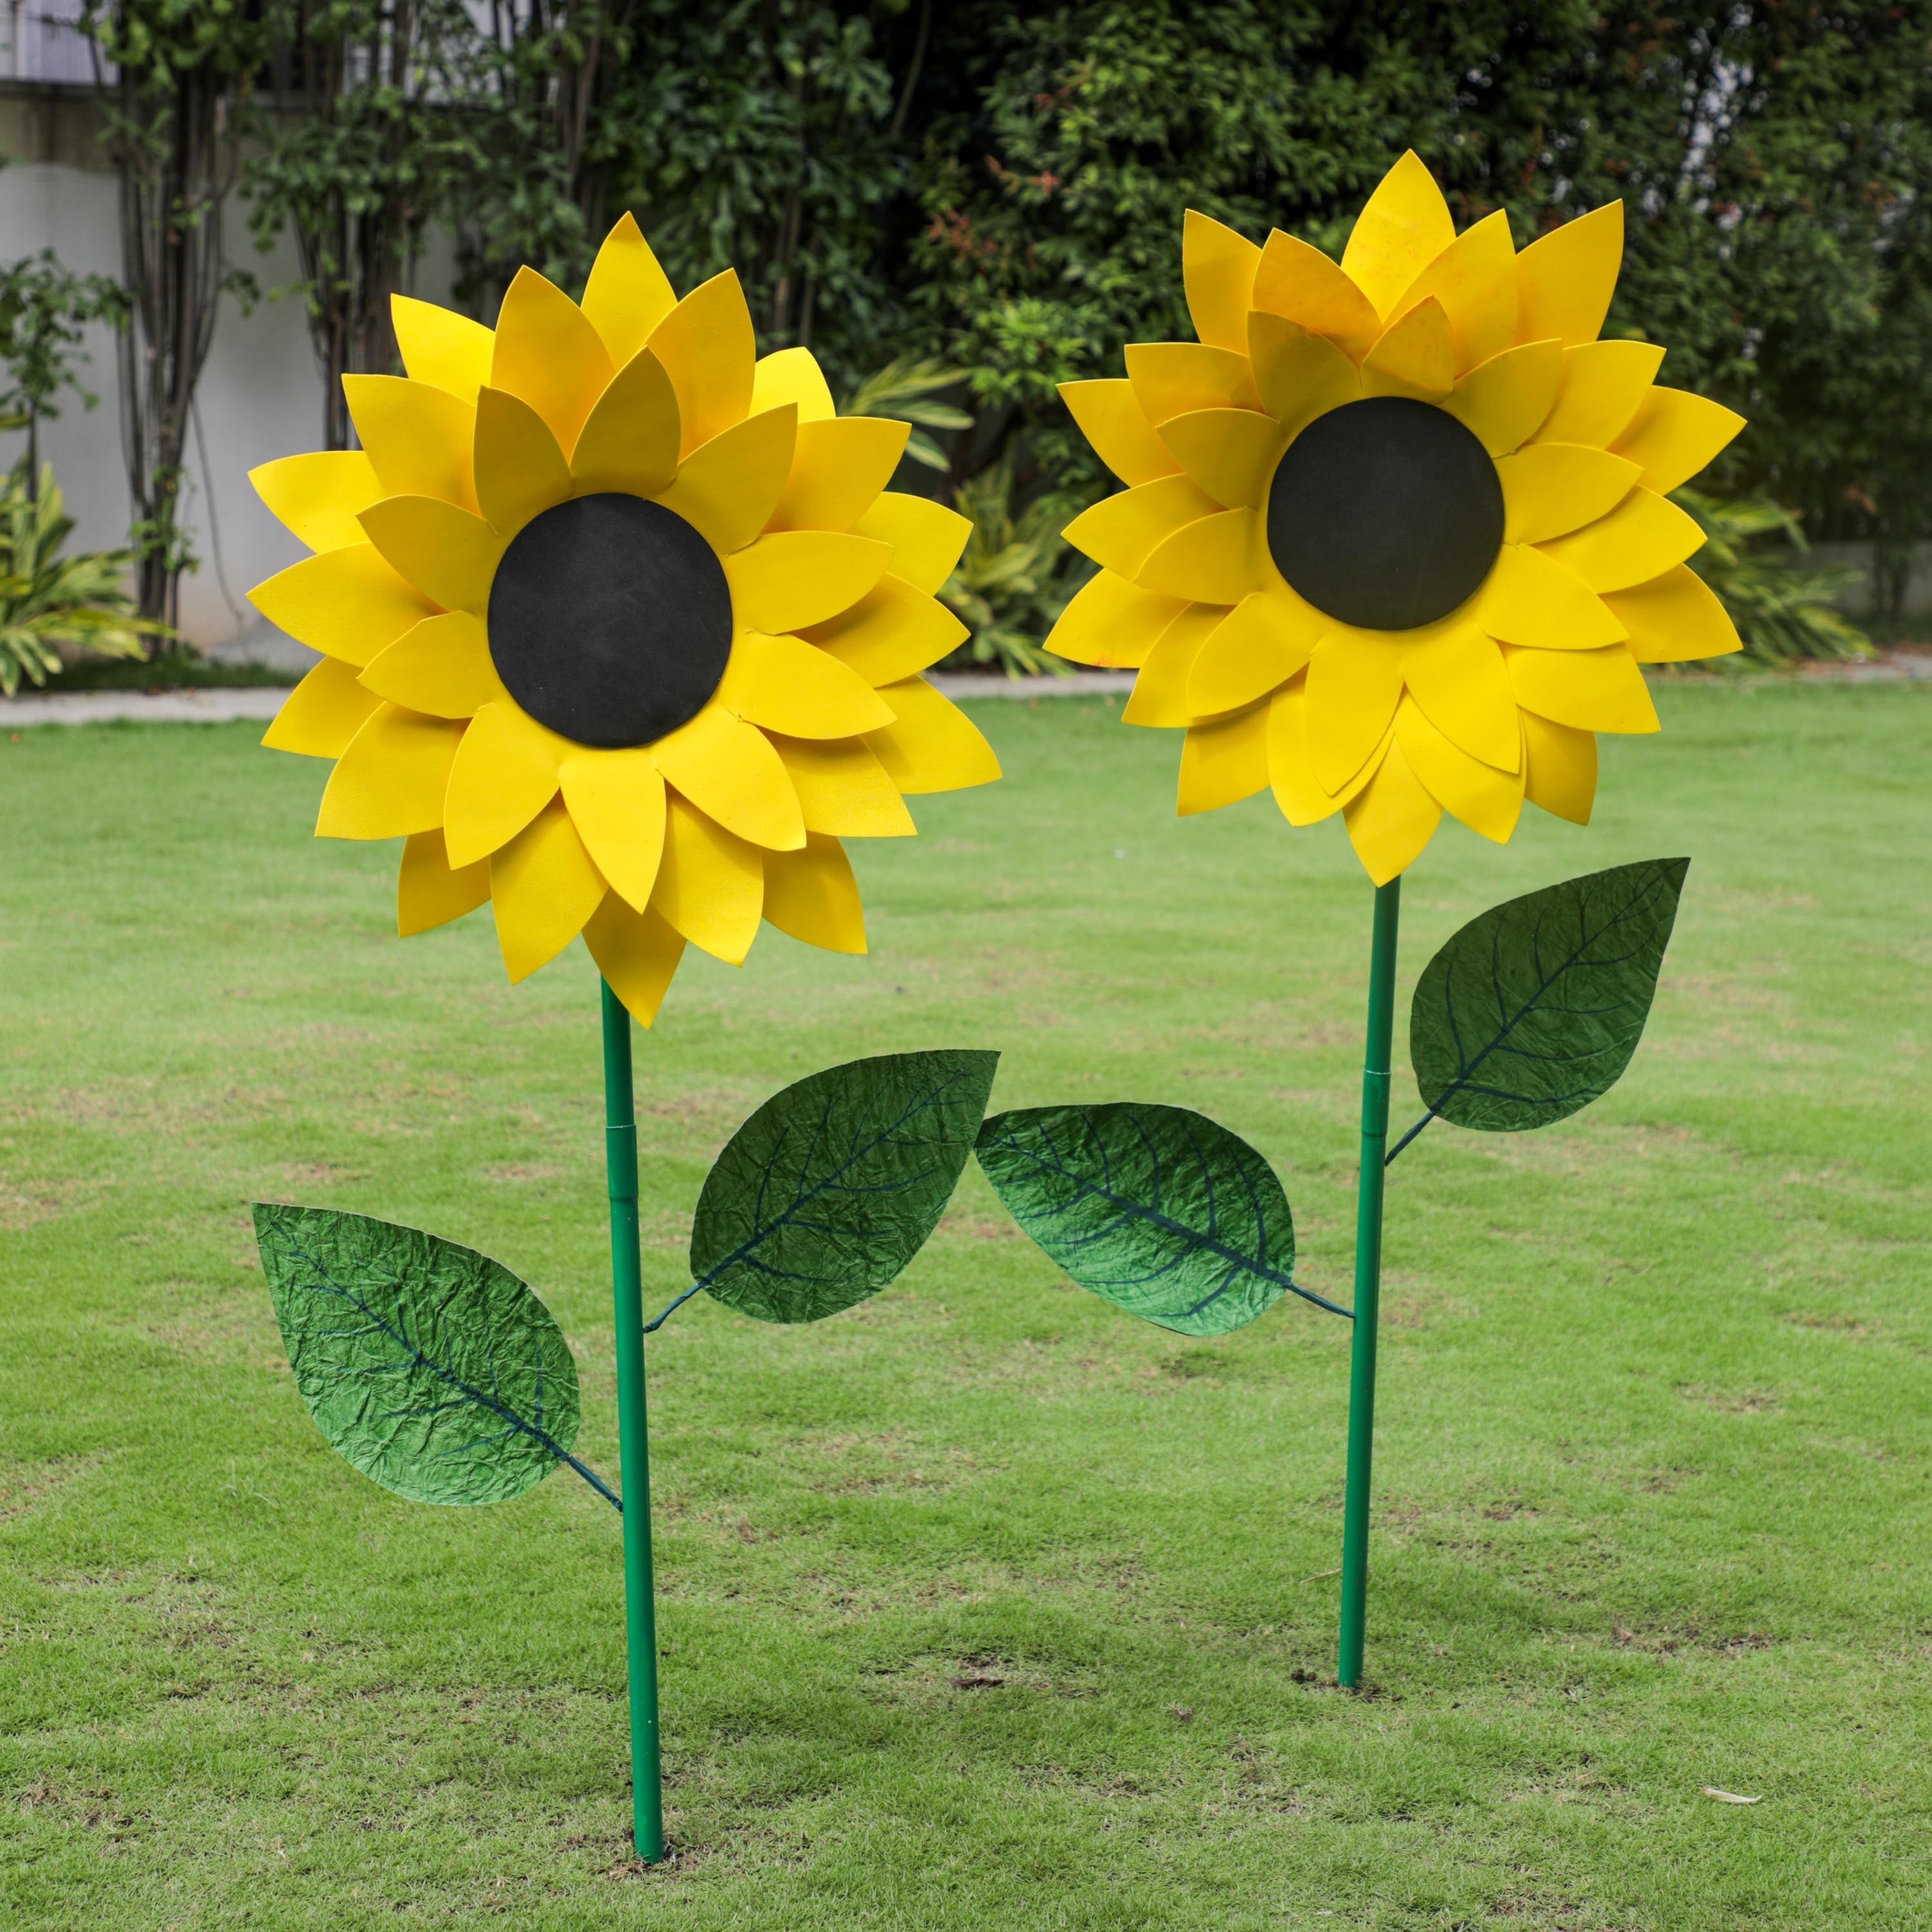 Sunflower outdoor decor for traditional decorations